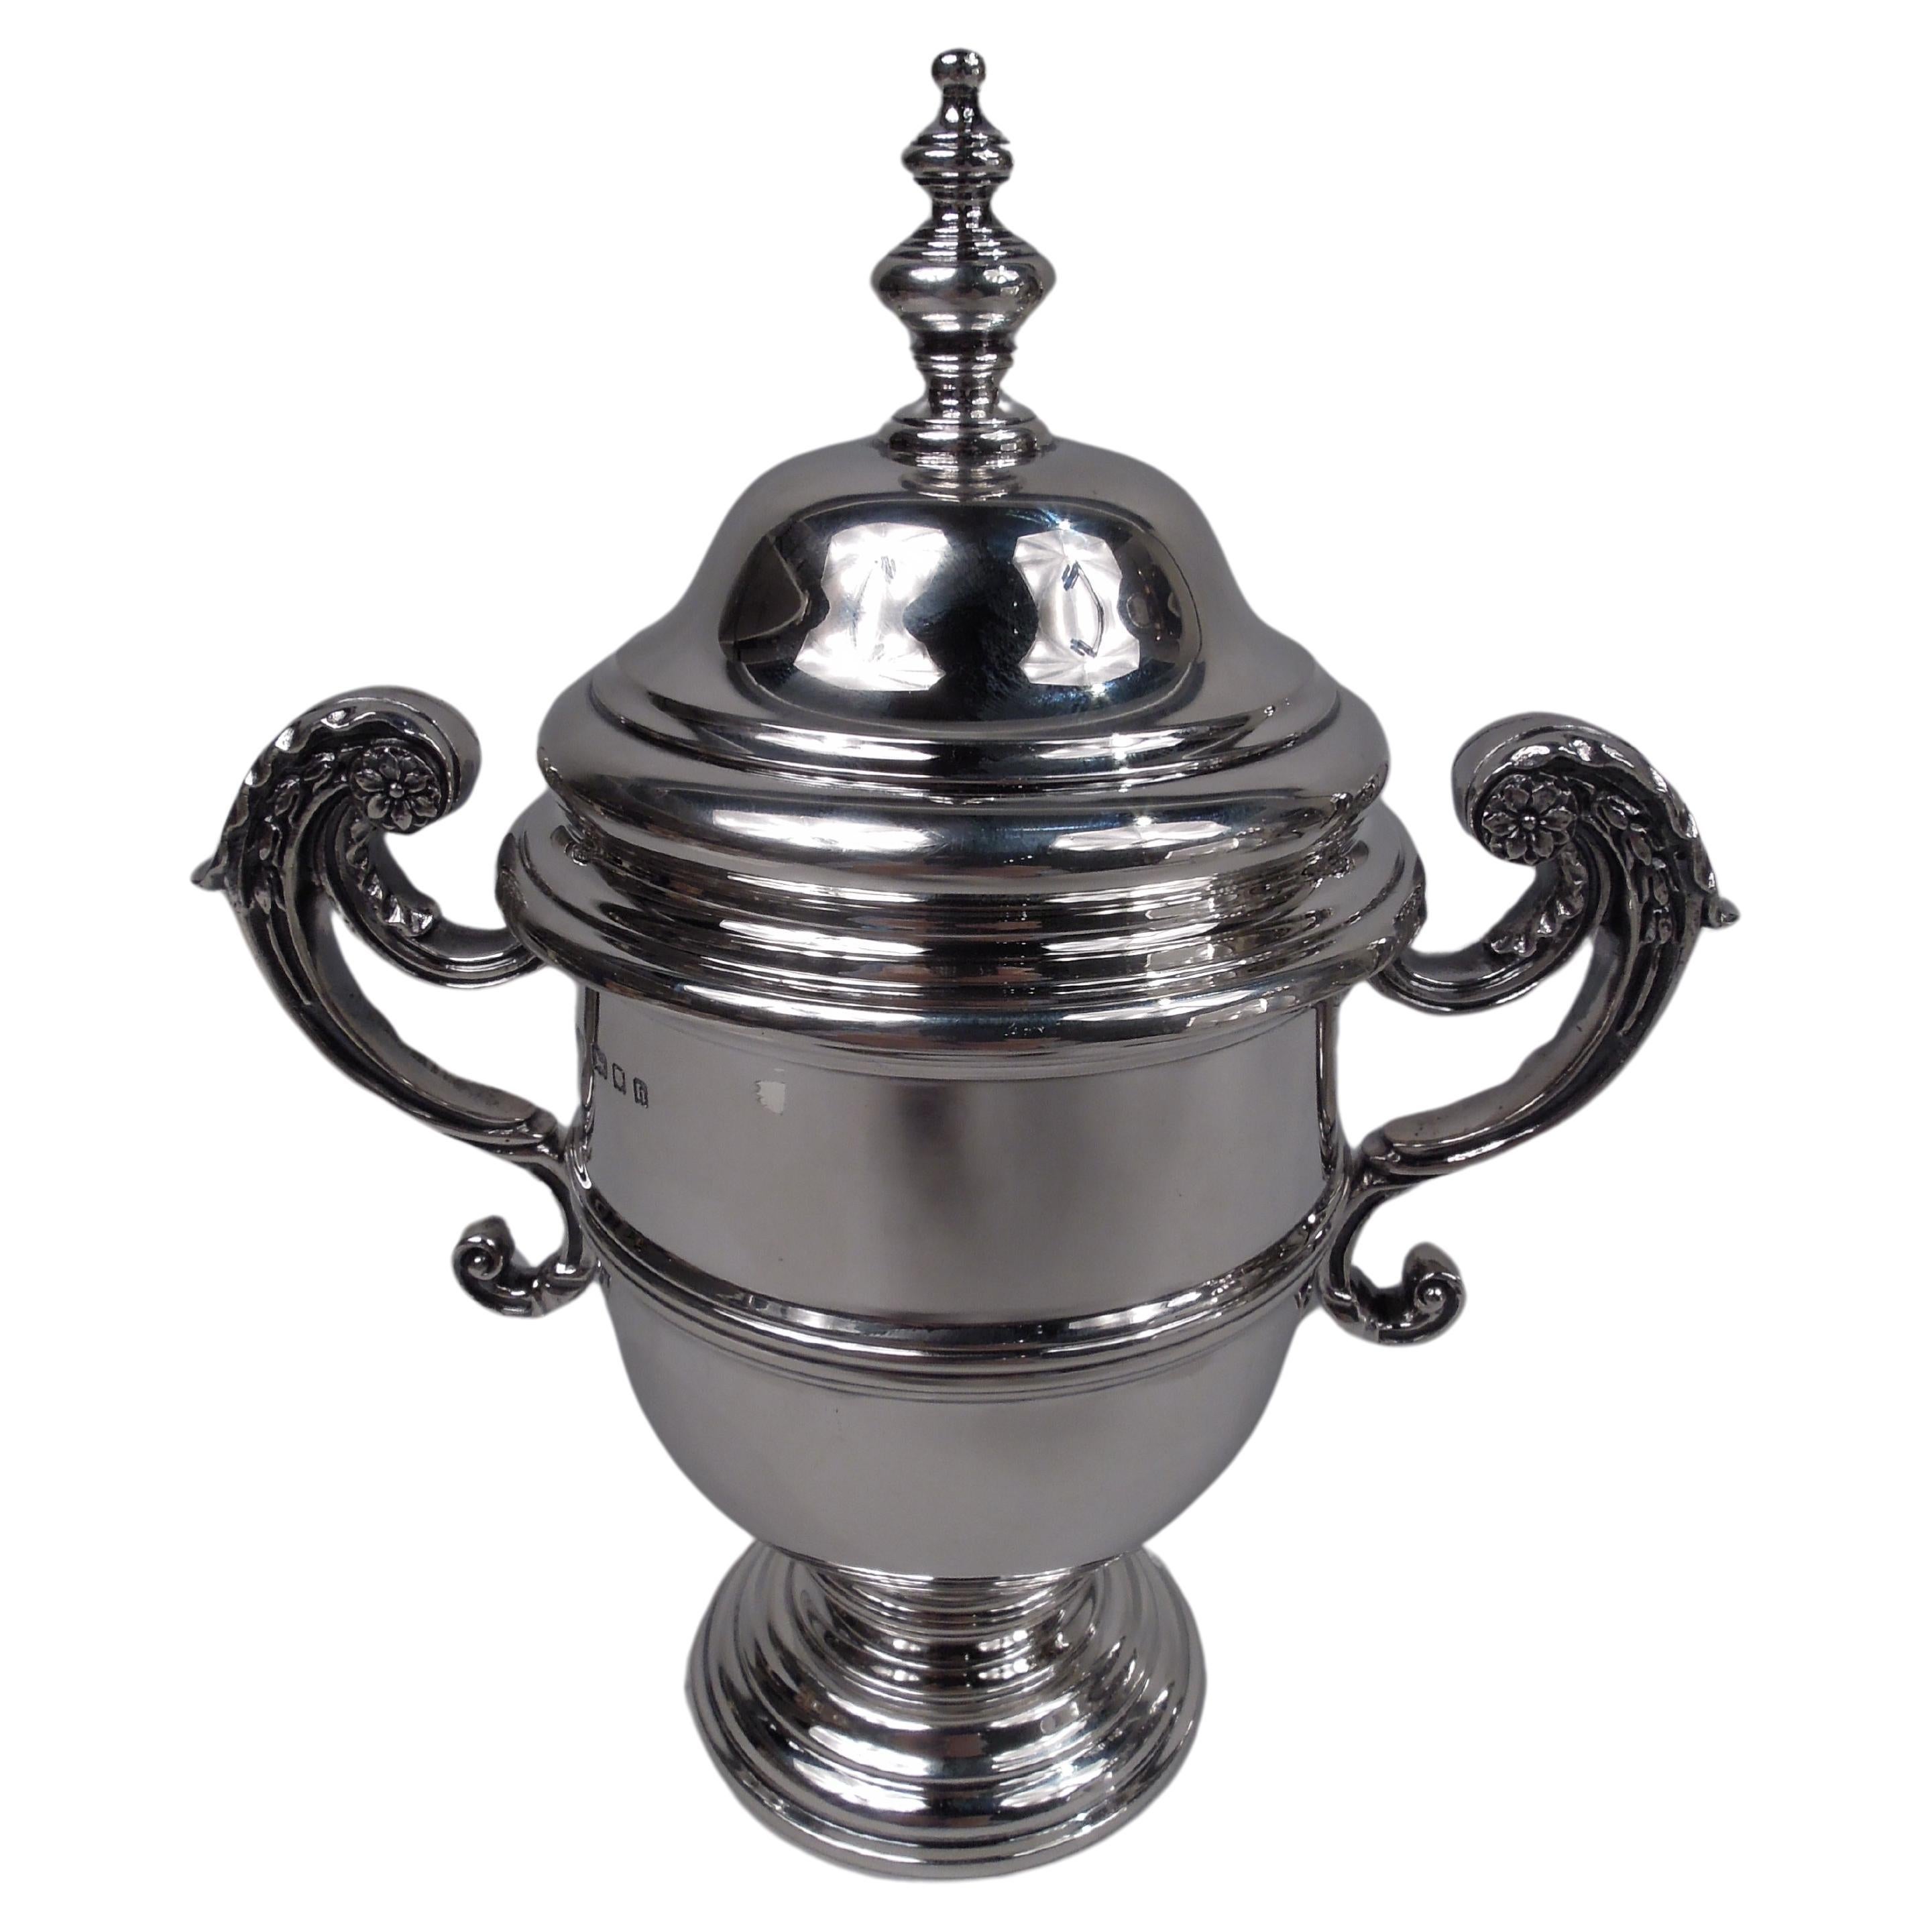 Garrard English Neoclassical Sterling Silver Covered Urn, 1923